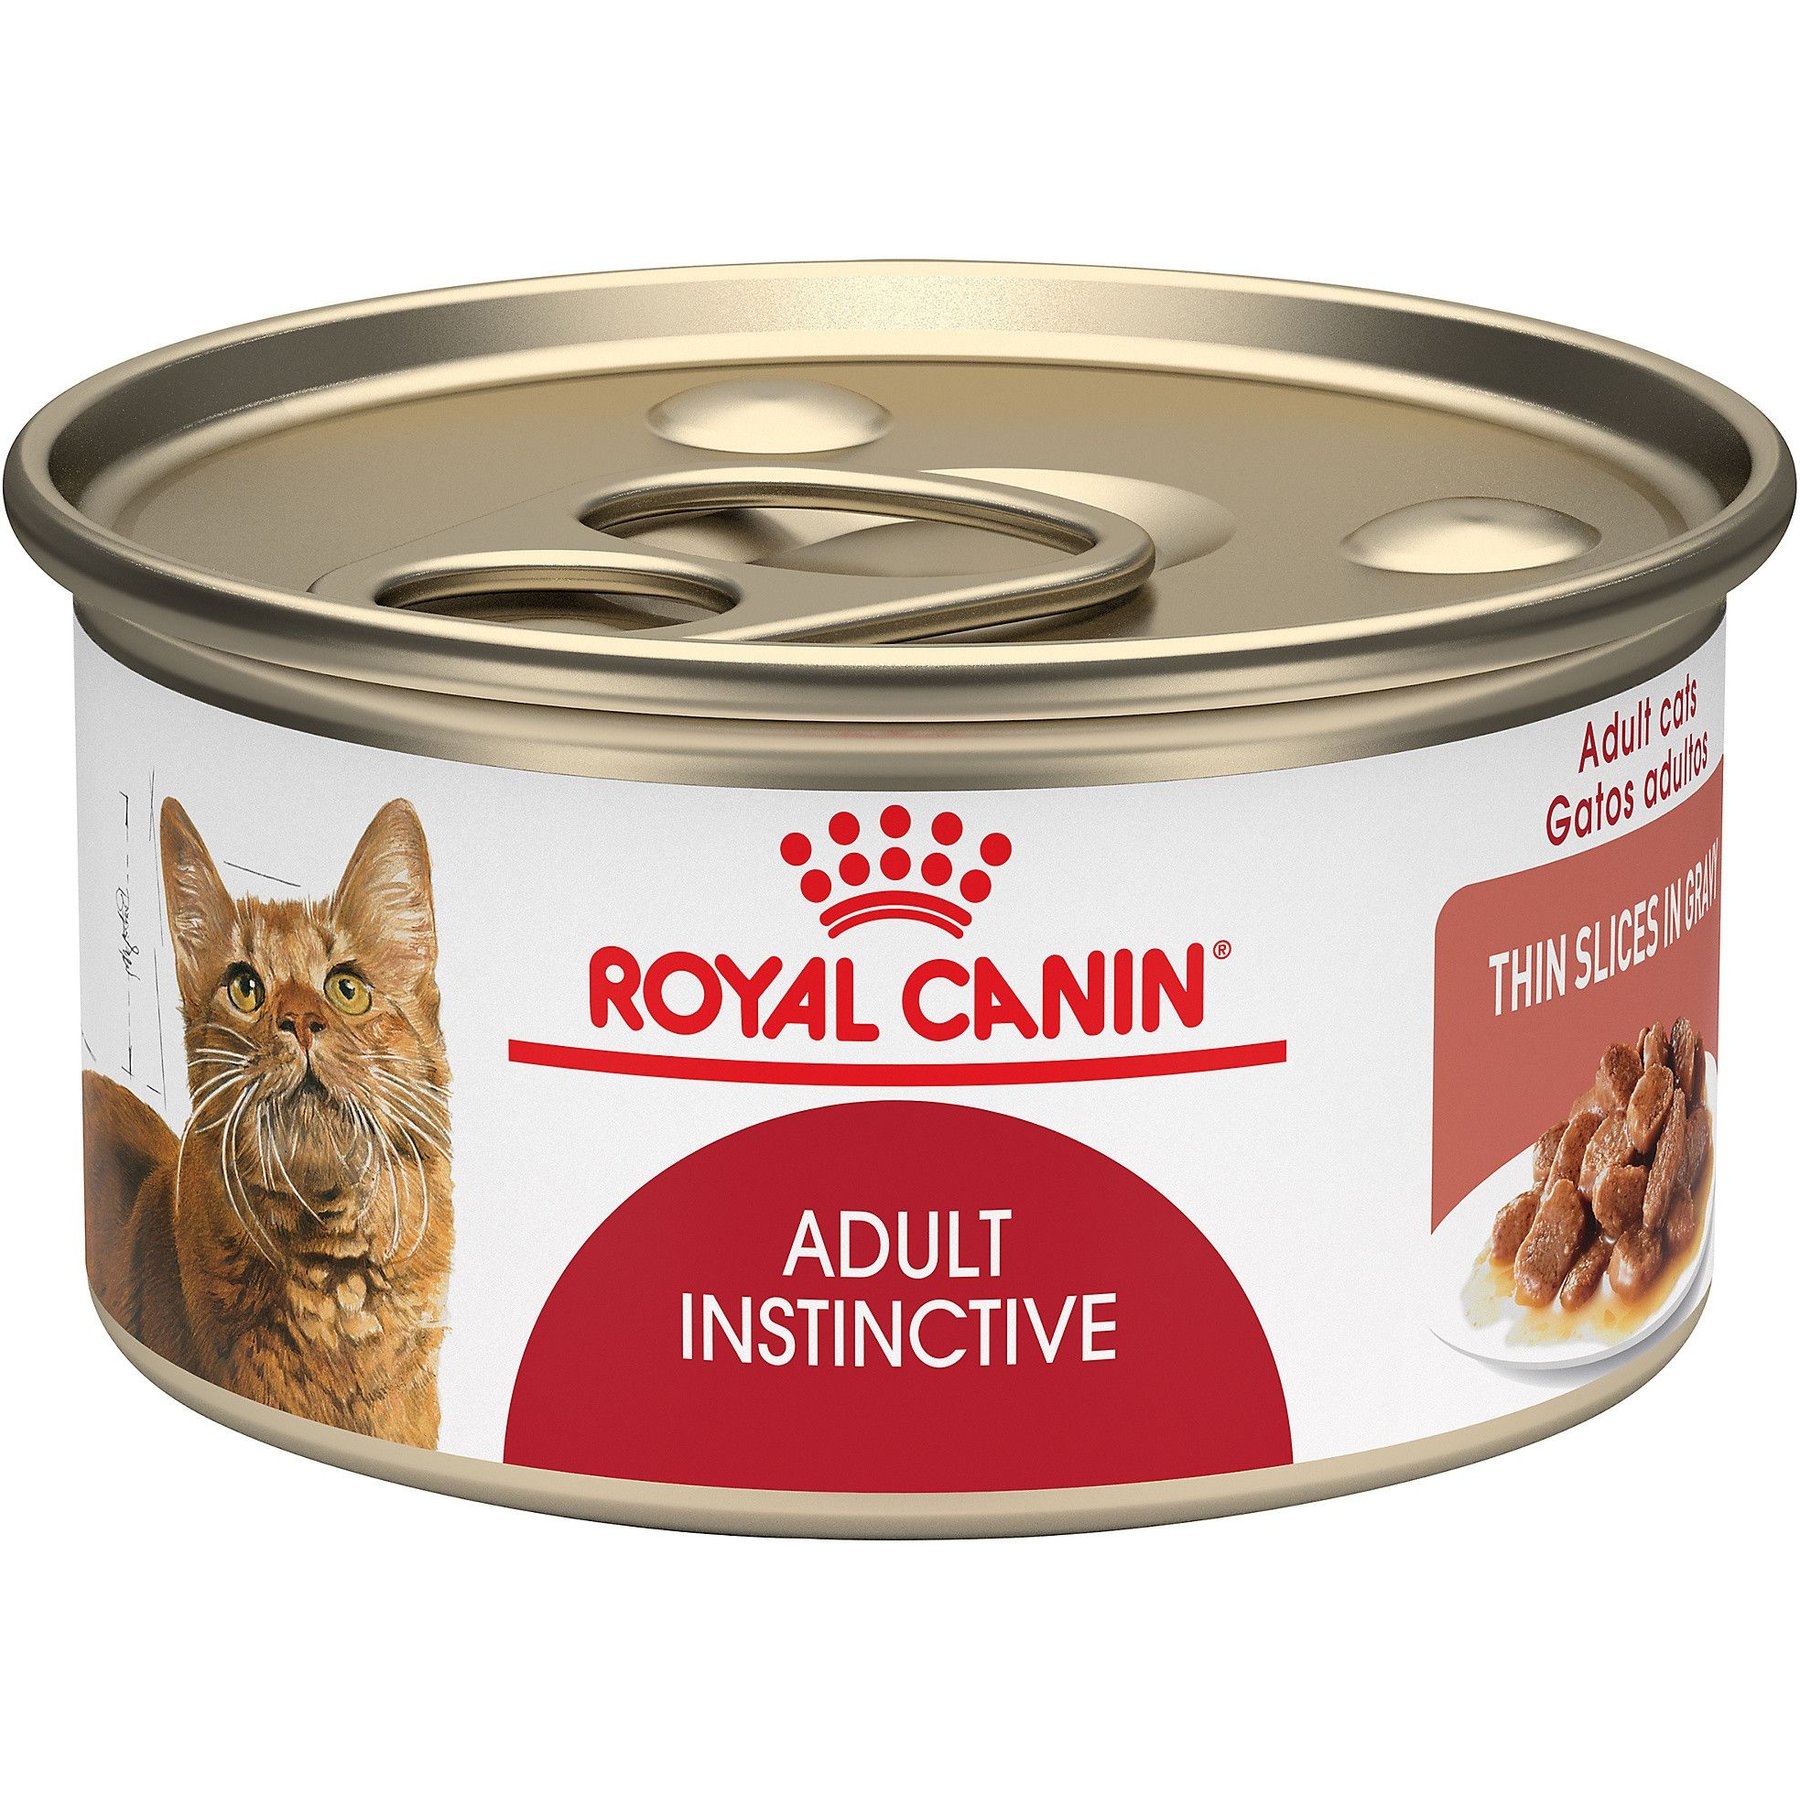 ROYAL CANIN Feline Health Nutrition Adult Instinctive Thin Slices in Gravy  Canned Cat Food, 3-oz, case of 24 - Chewy.com